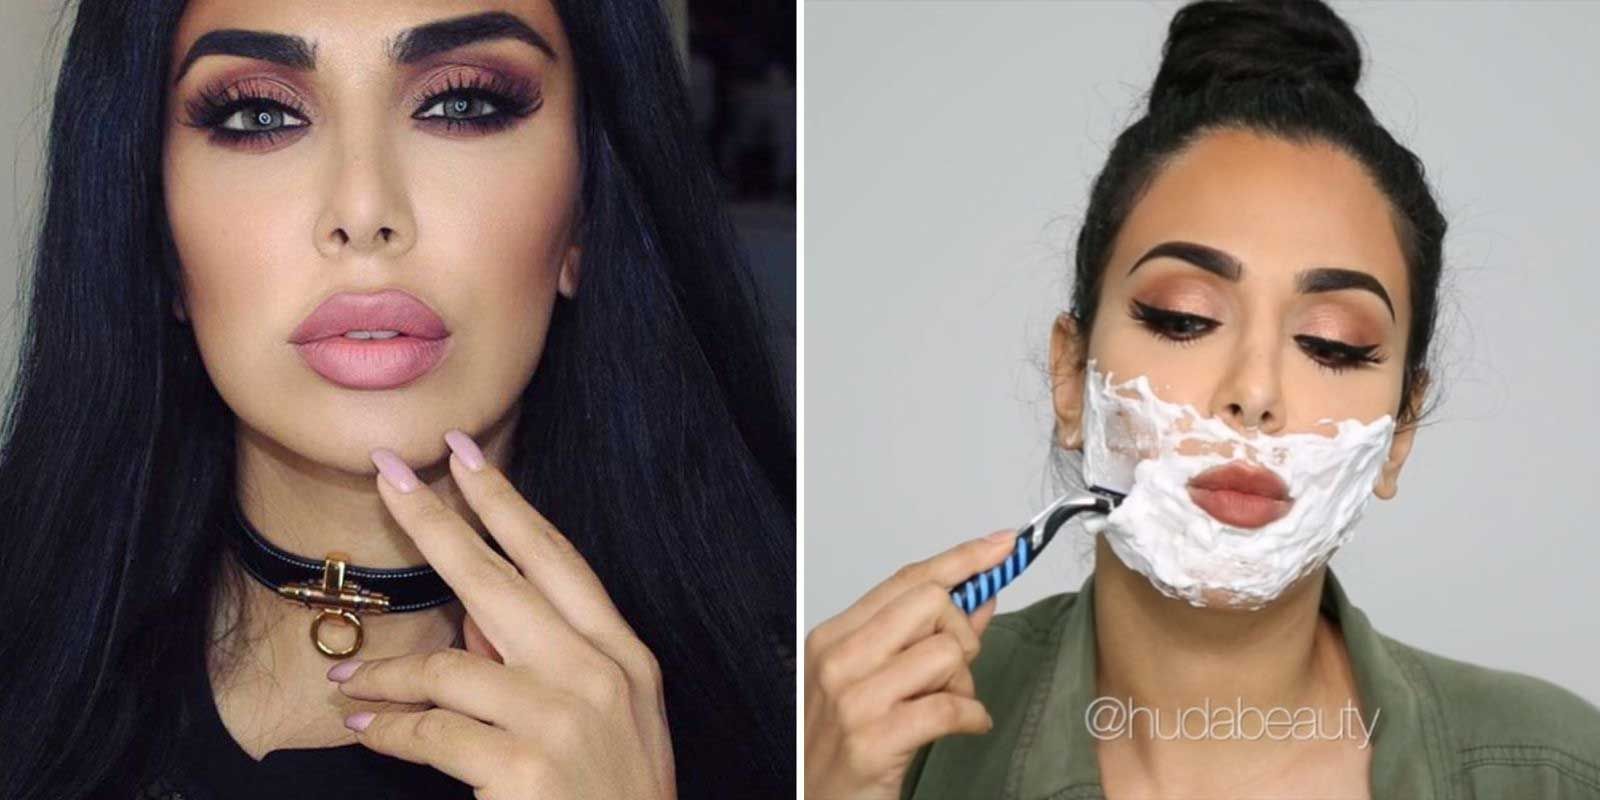 This beauty blogger contoured her whole body — to make an